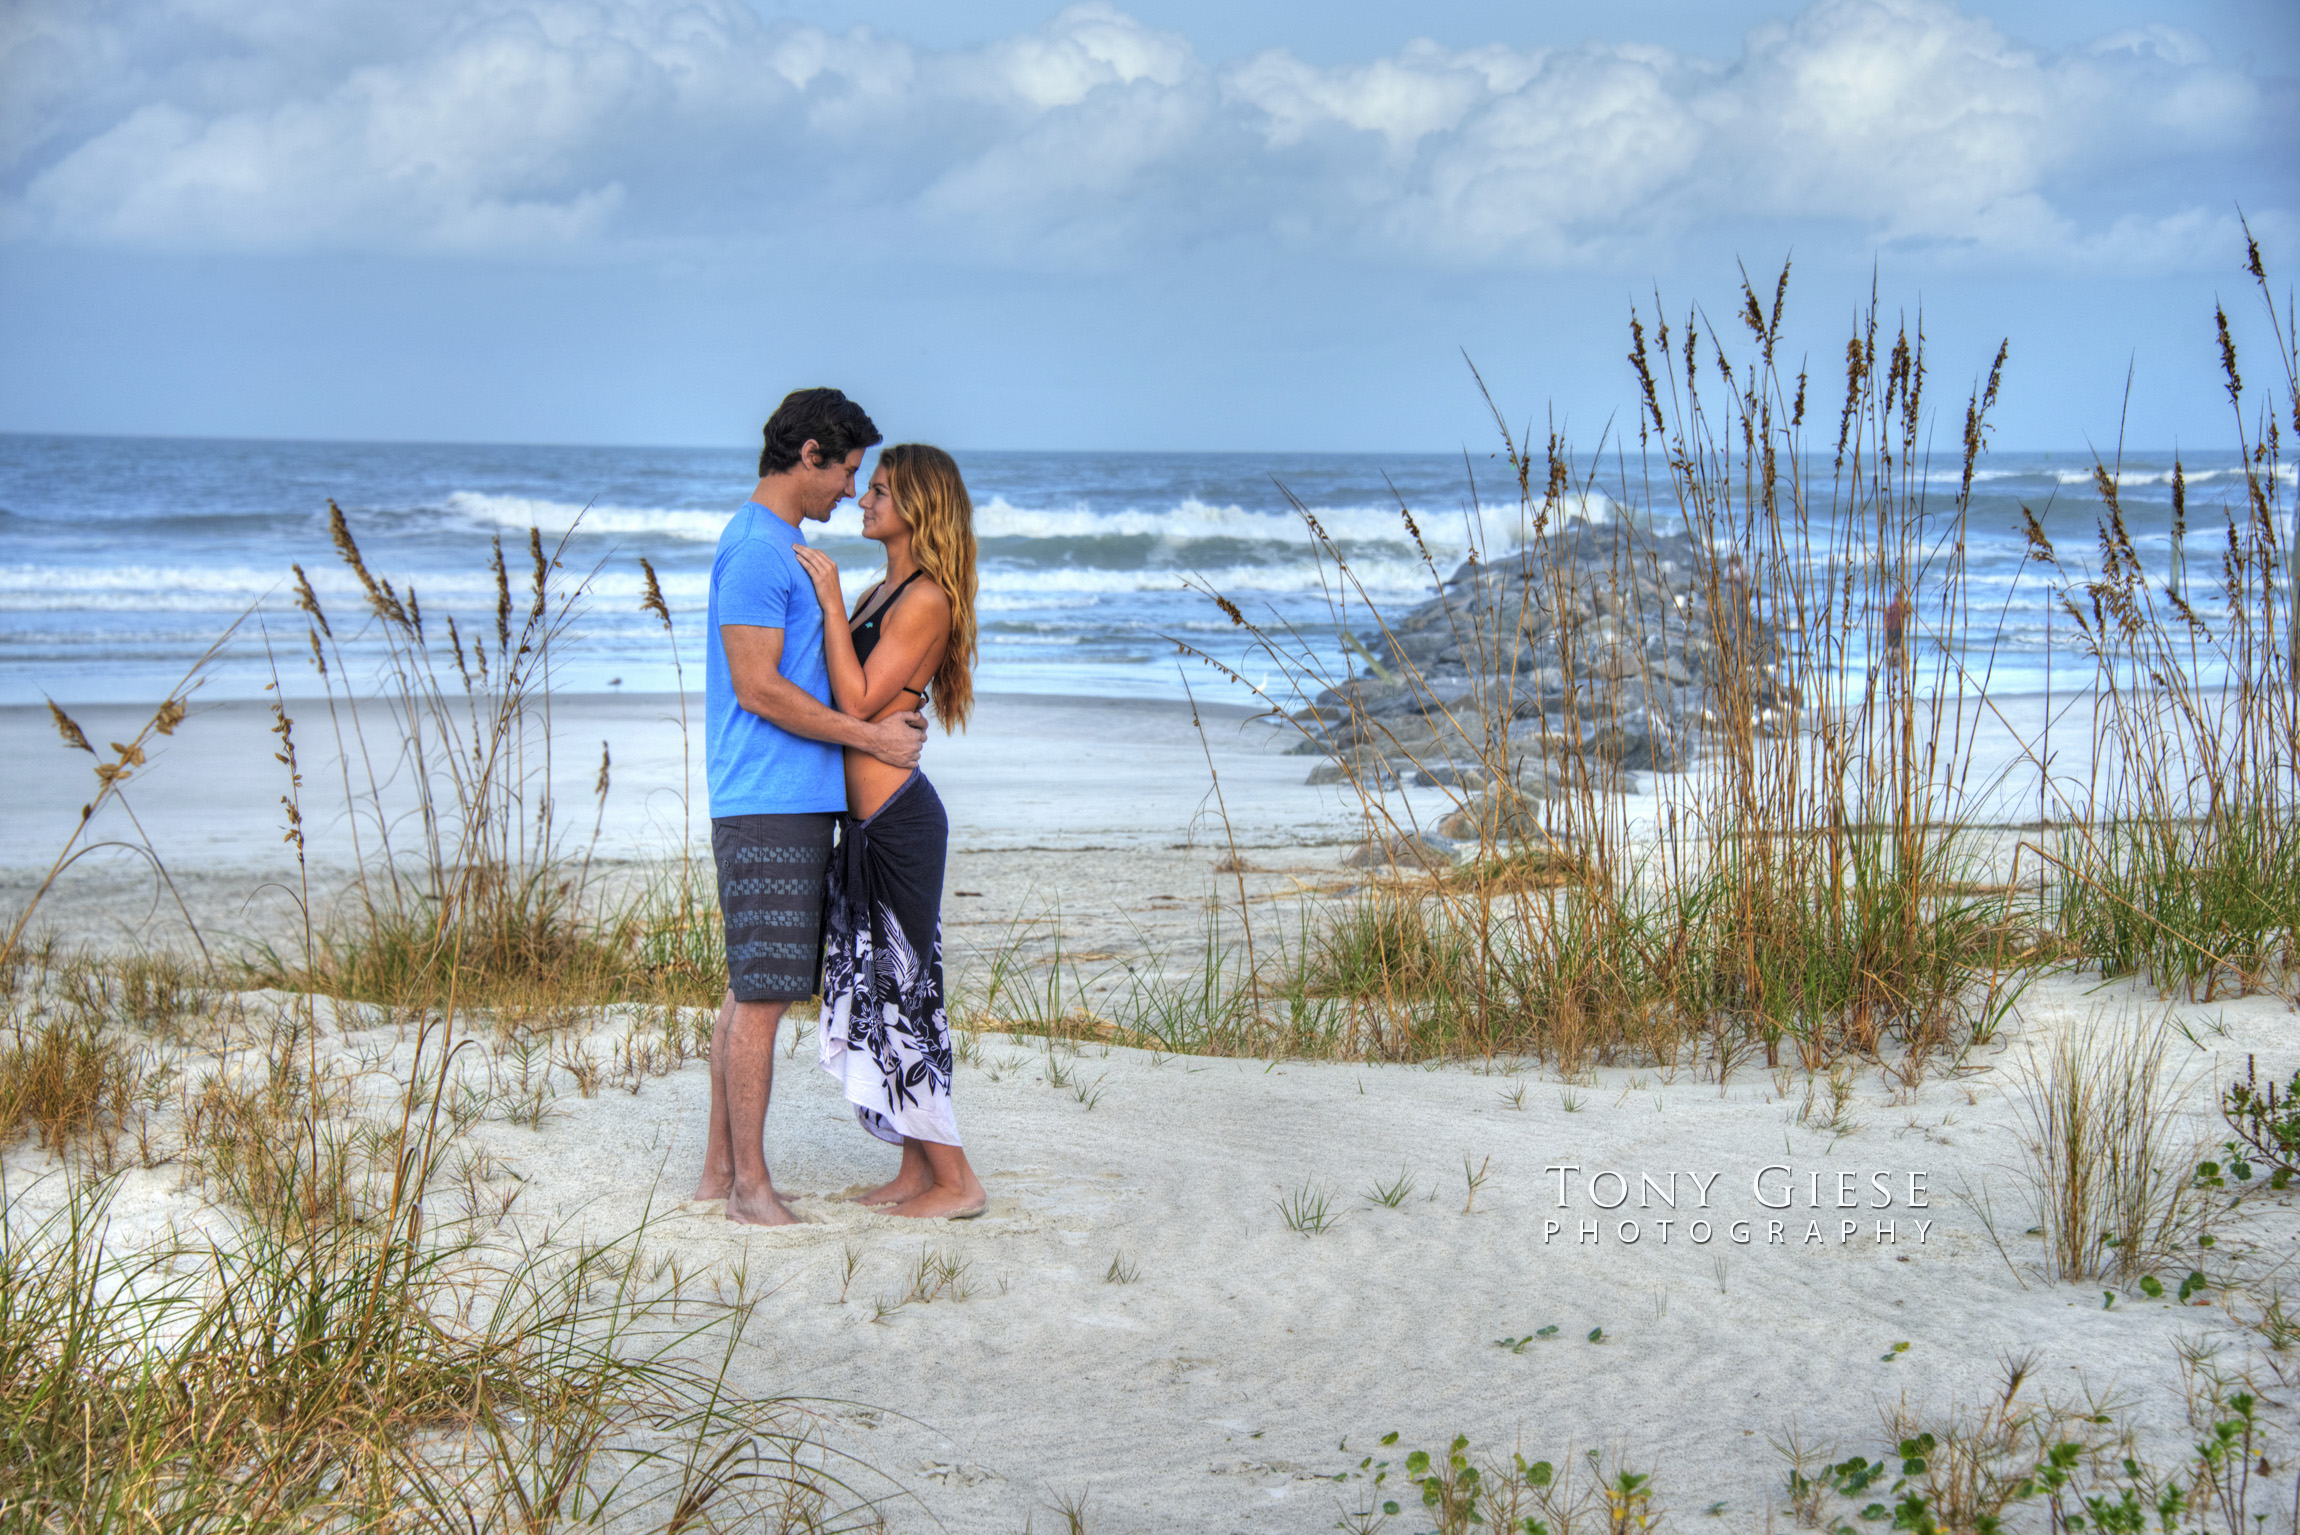 Capturing those great romantic moments on New Smyrna Beach.